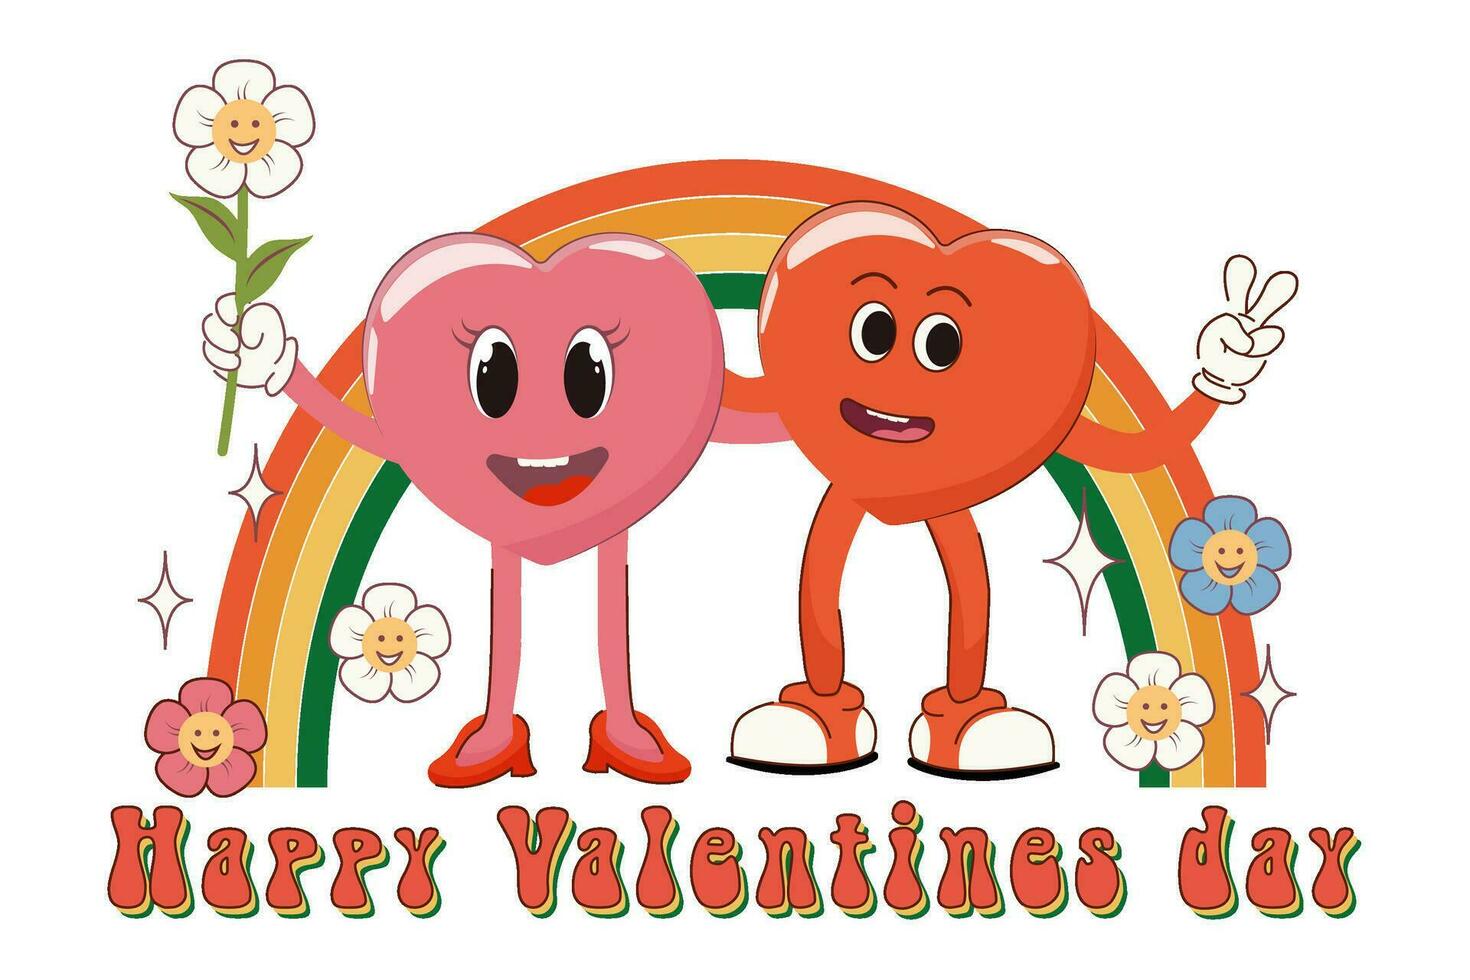 Retro cartoon poster with funny characters. Happy Valentine's Day. Retro style 60s 70s. Vector illustration